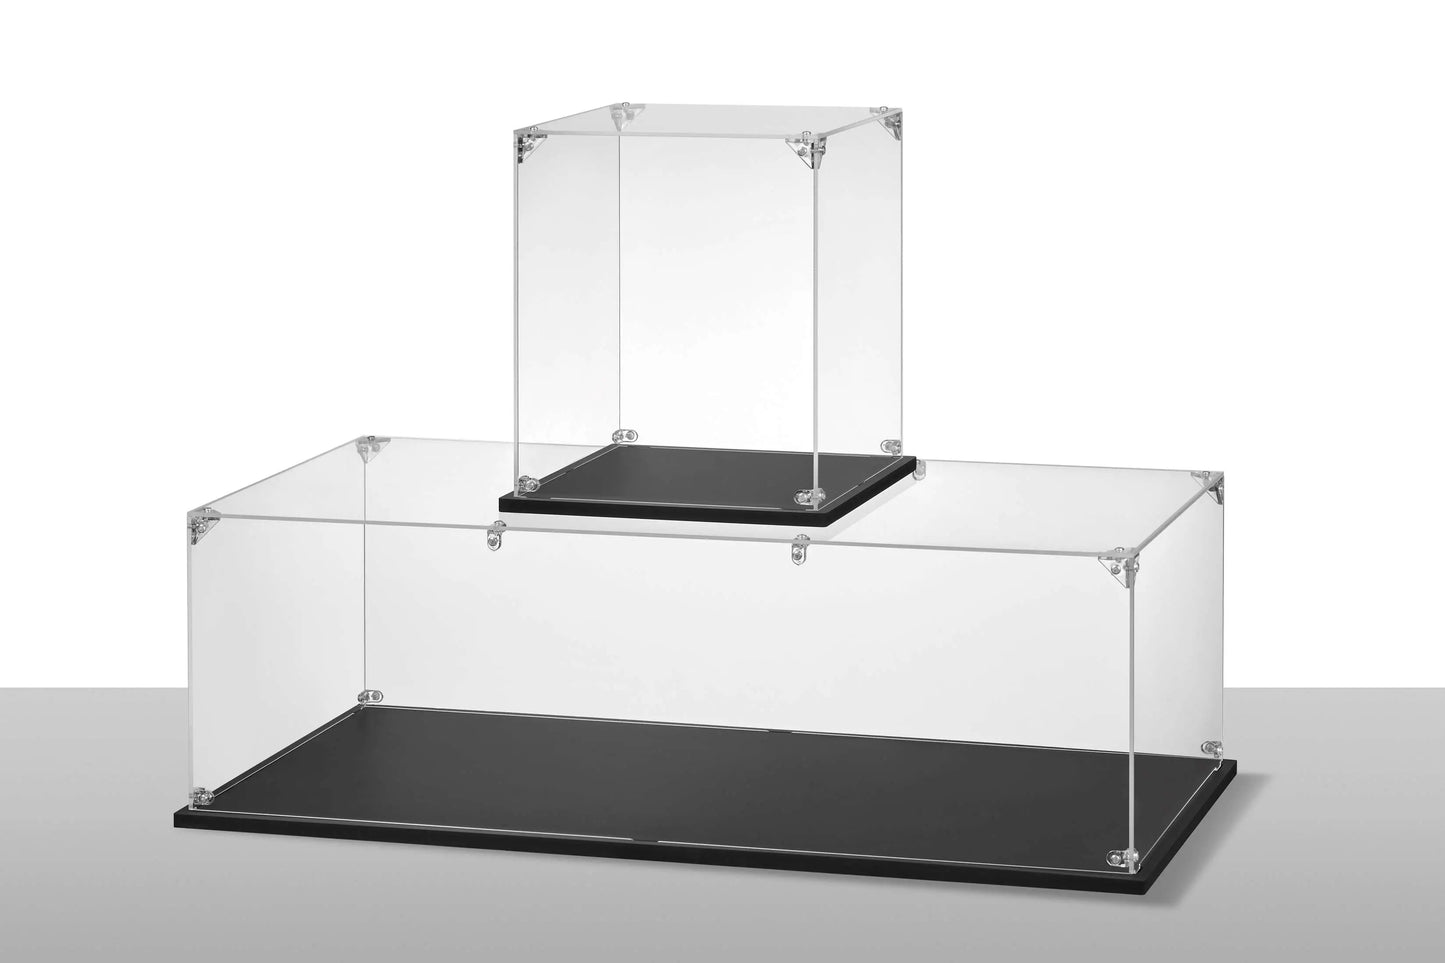 Acrylic Display Case for LEGO® Imperial TIE Fighter™ 75300